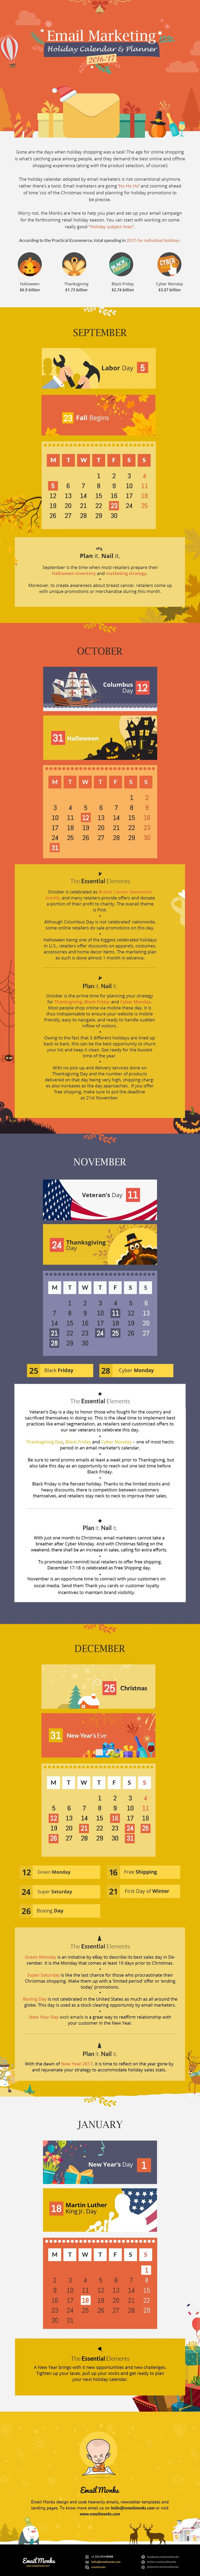 Email-Marketing-Holiday-Calendar-Infographic.jpg